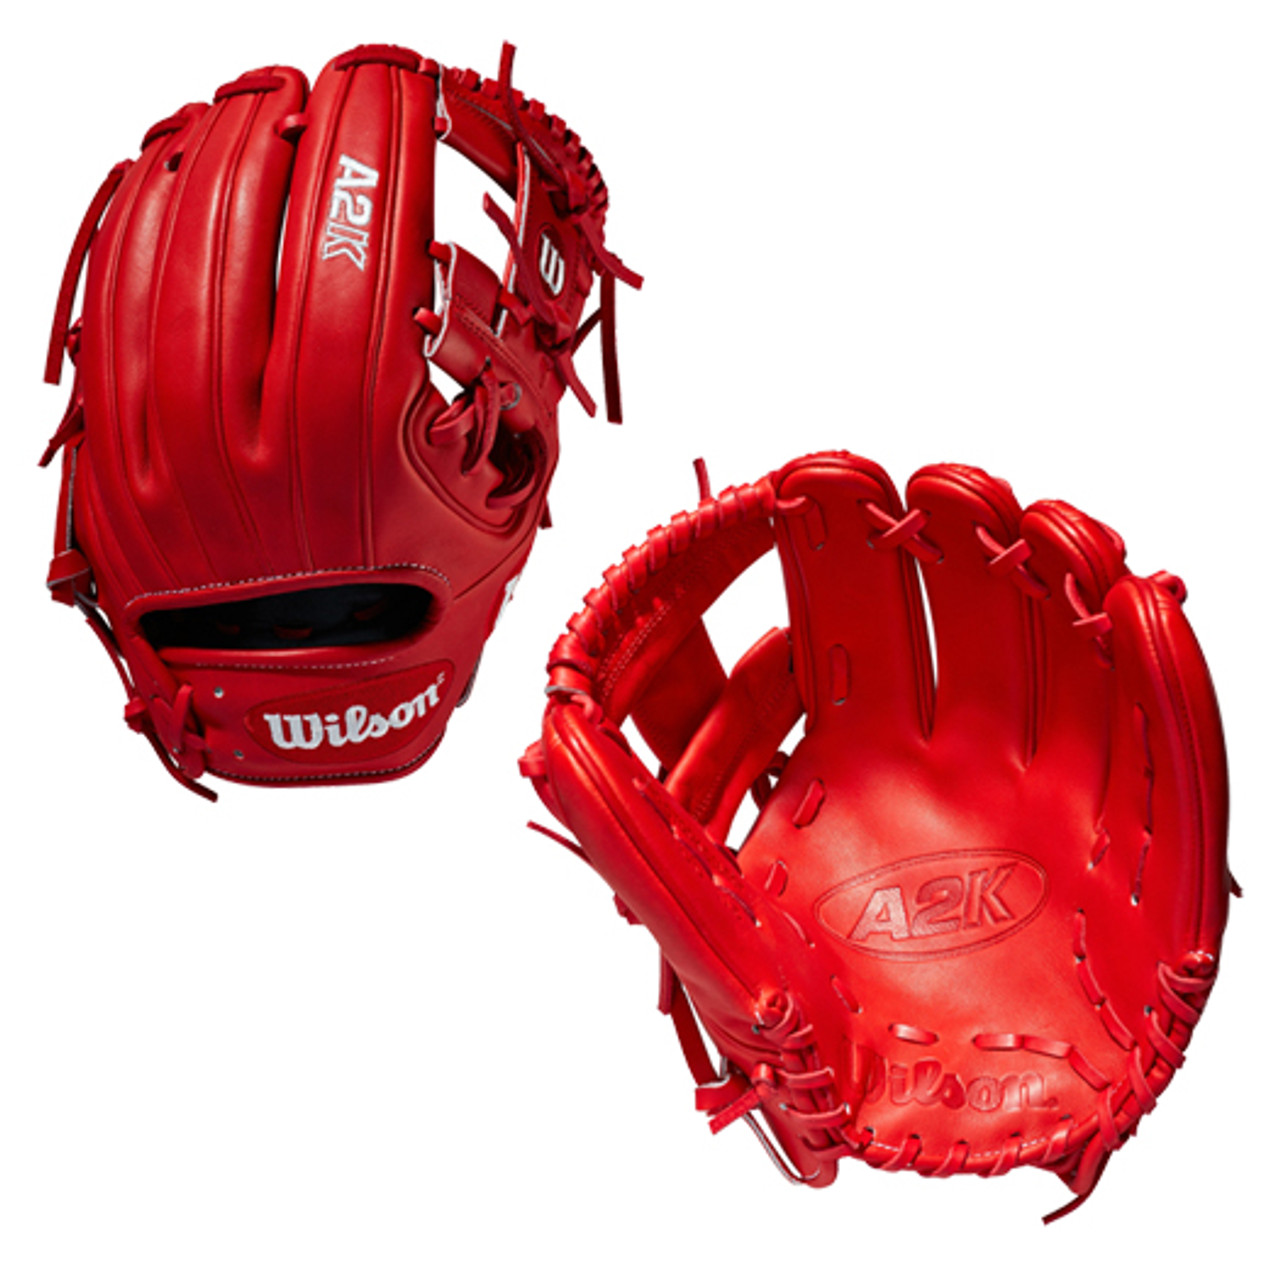 Wilson A2K 2019 January Glove of the Month Ozzie Albies Model 11.5